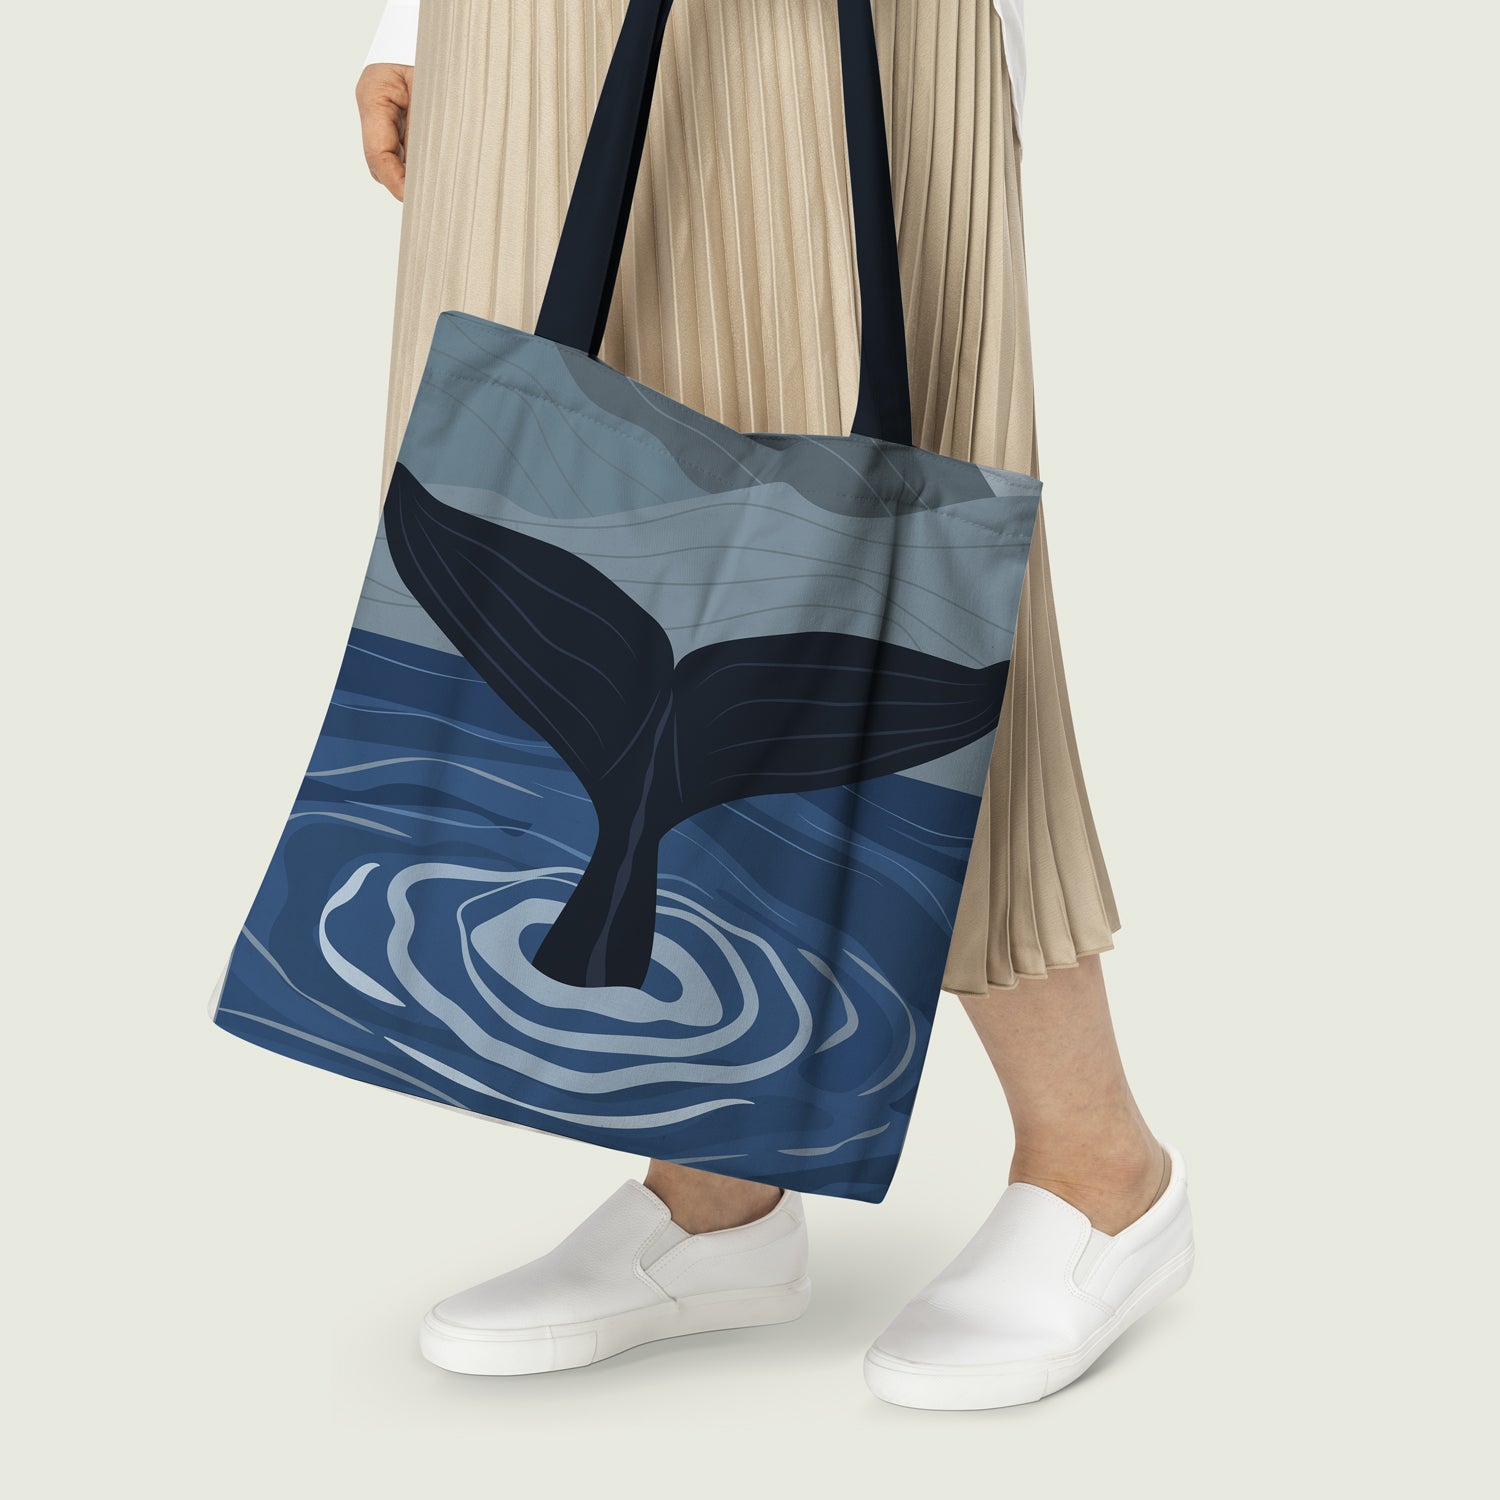 Stylish whale tail tote bag diving inside the ocean with blue sky above.